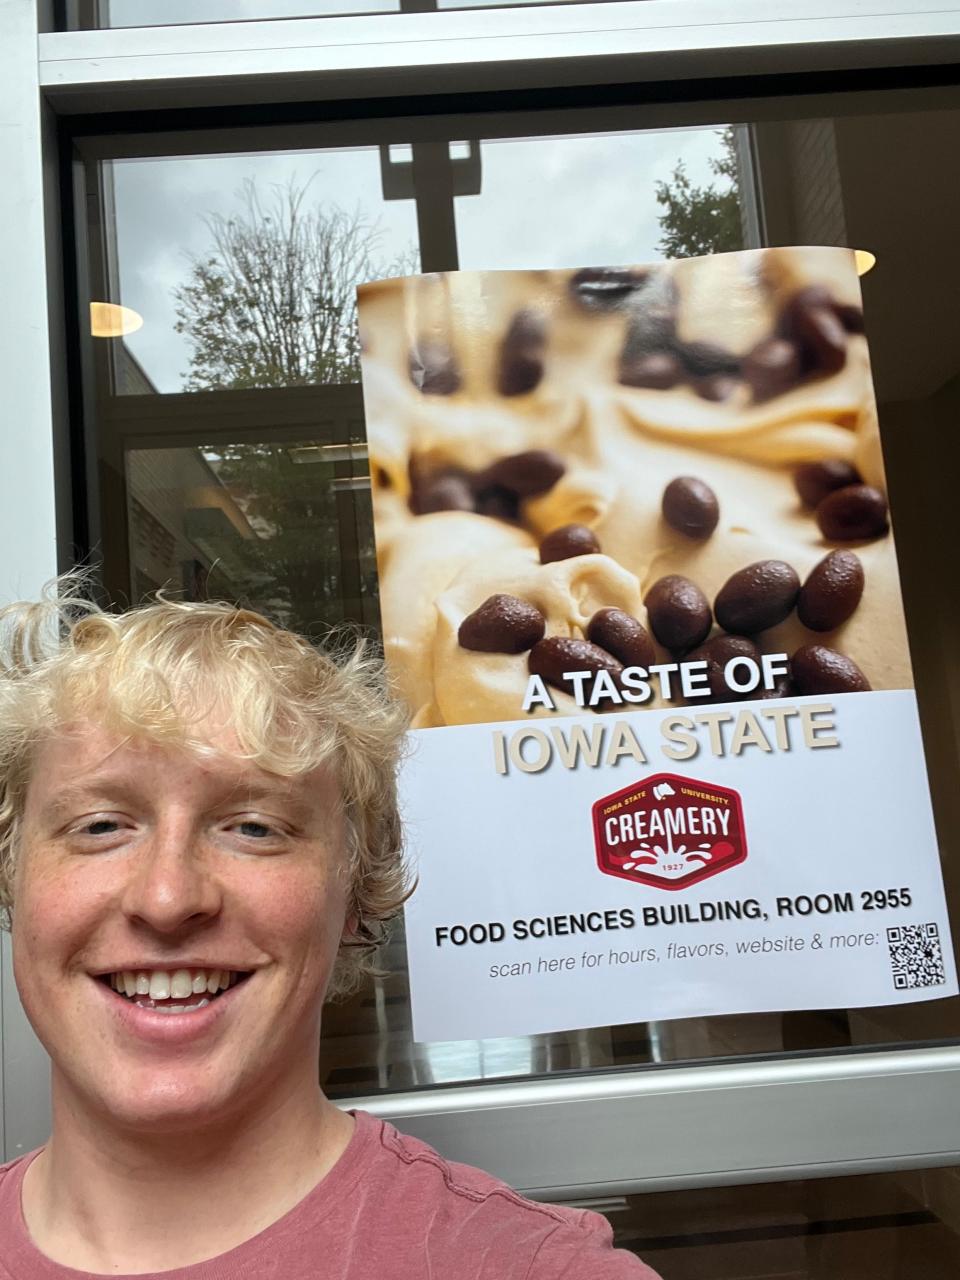 James Douthit takes a selfie at the ISU Creamery, located in the Food Sciences Building at Iowa State.